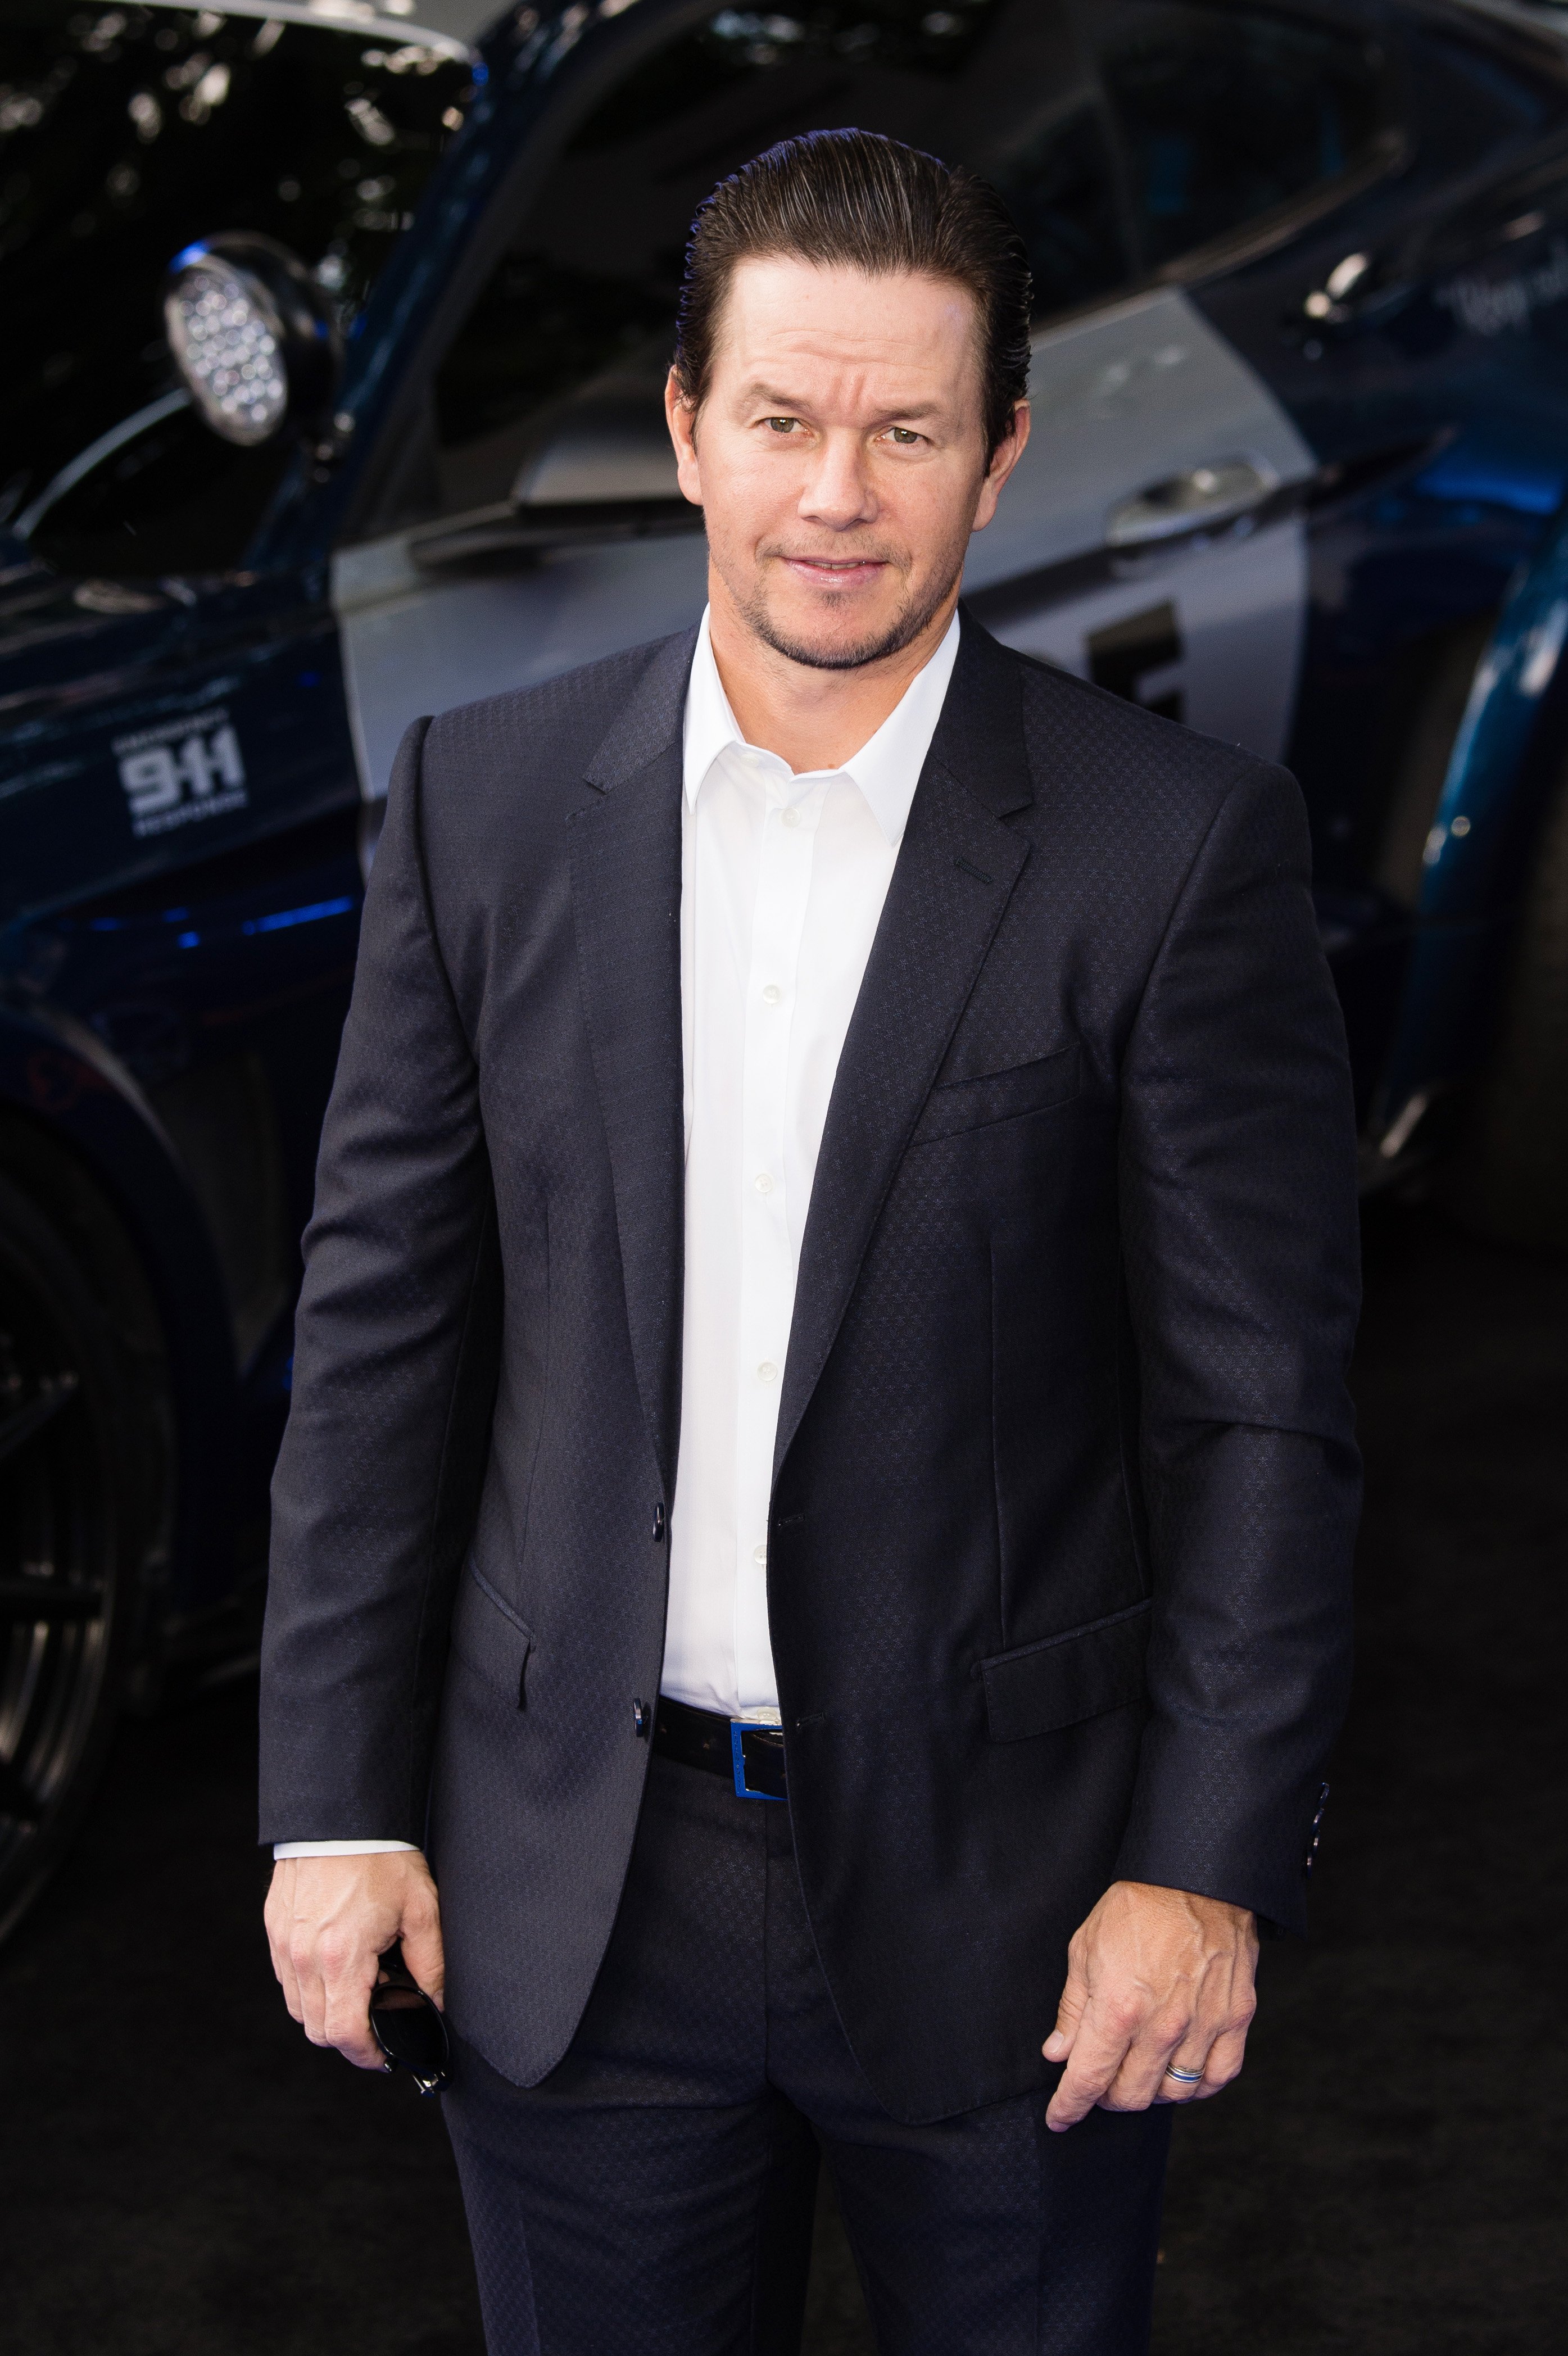  Mark Wahlberg attends the global premiere of "Transformers: The Last Knight" at Cineworld Leicester Square on June 18, 2017 | Photo: GettyImages